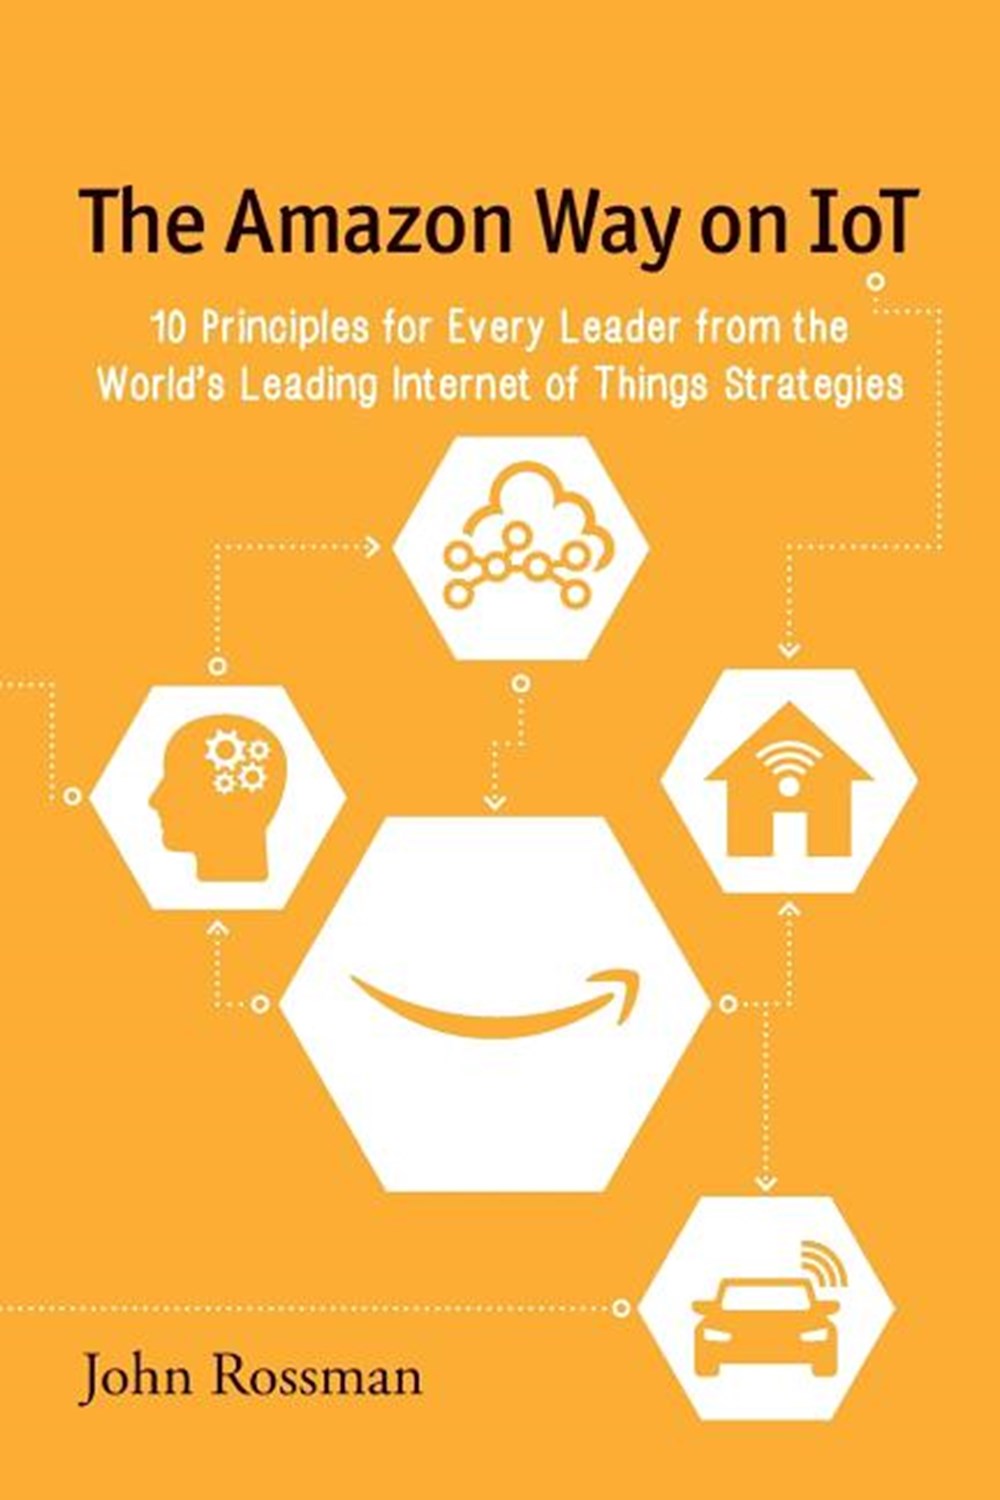 Amazon Way on IoT: 10 Principles for Every Leader from the World's Leading Internet of Things Strate